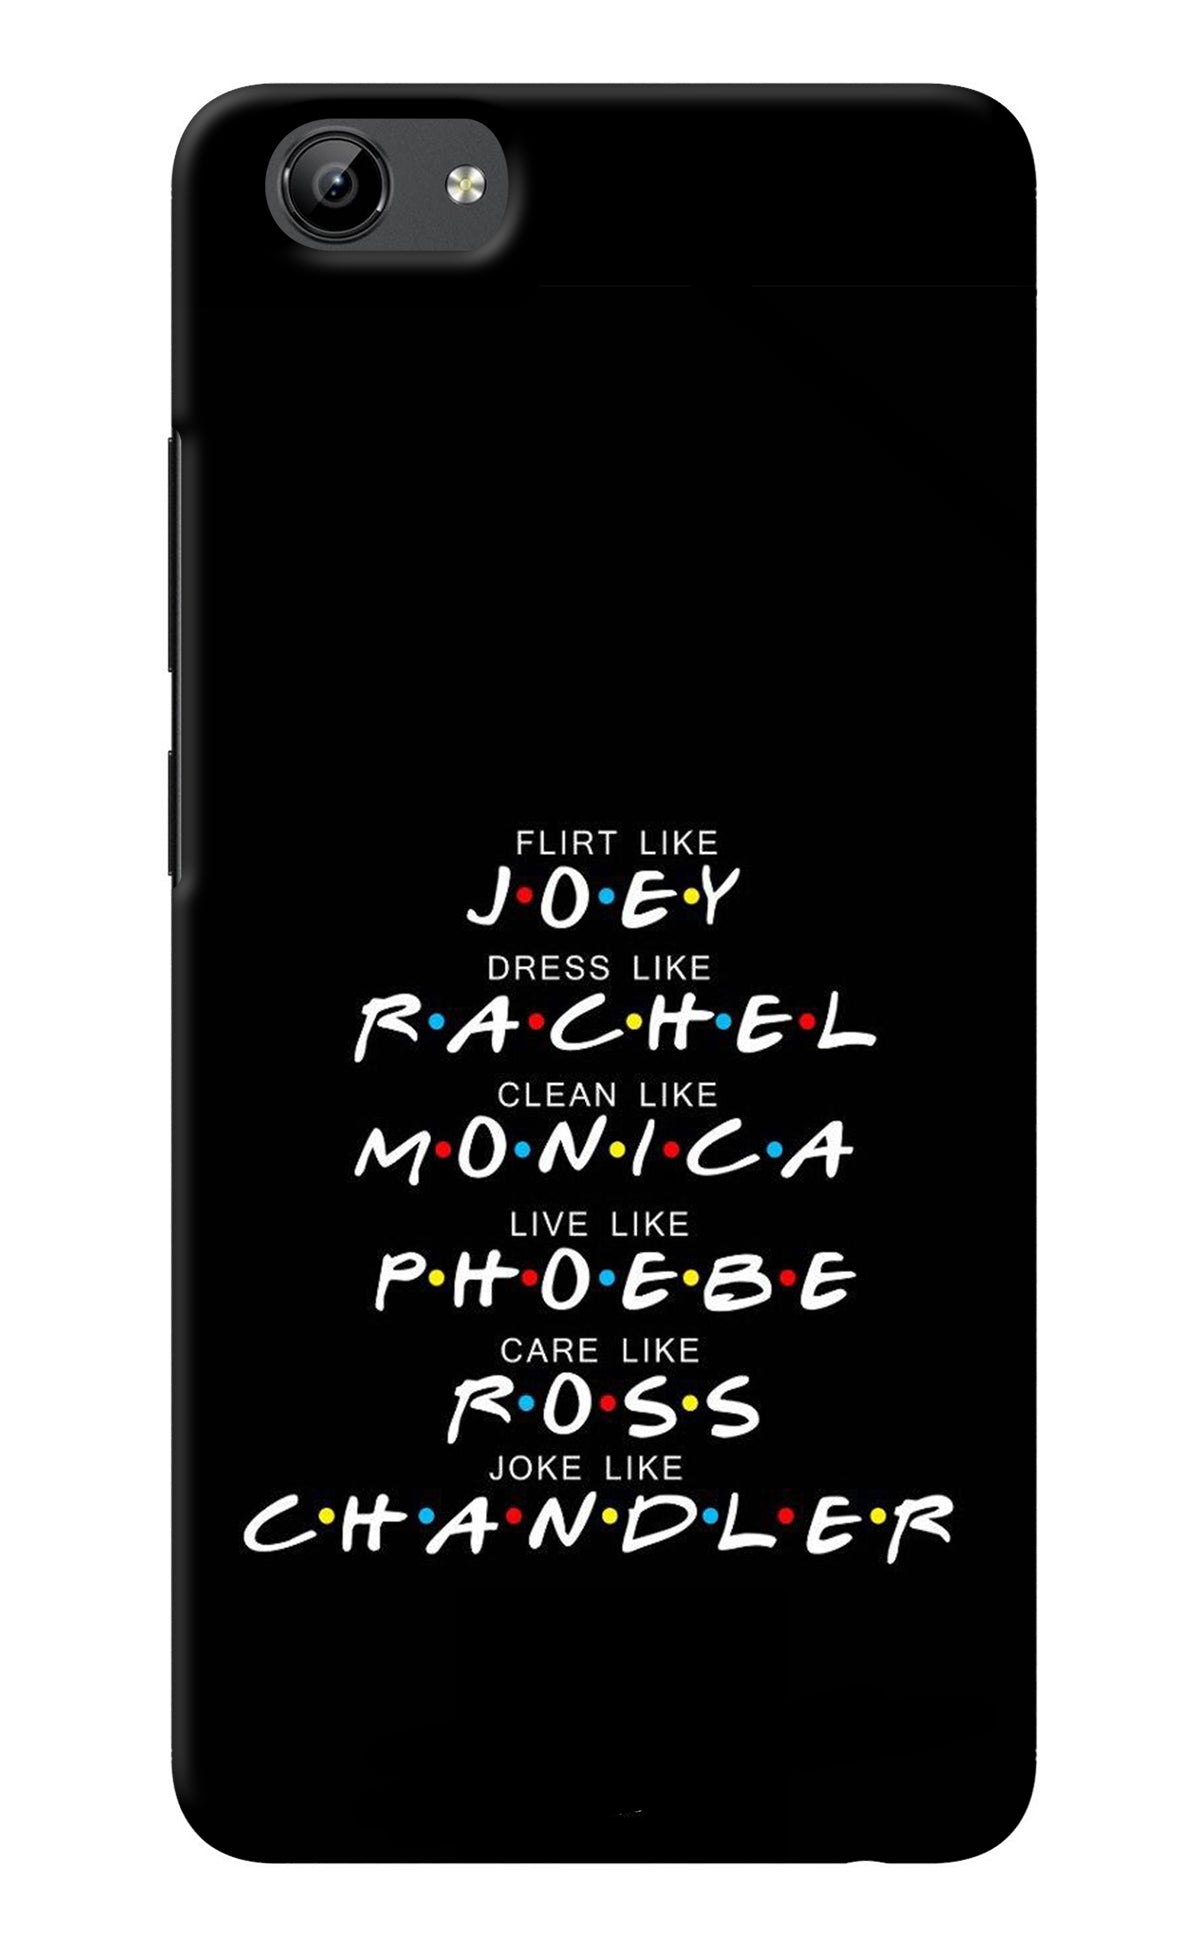 FRIENDS Character Vivo Y71 Back Cover